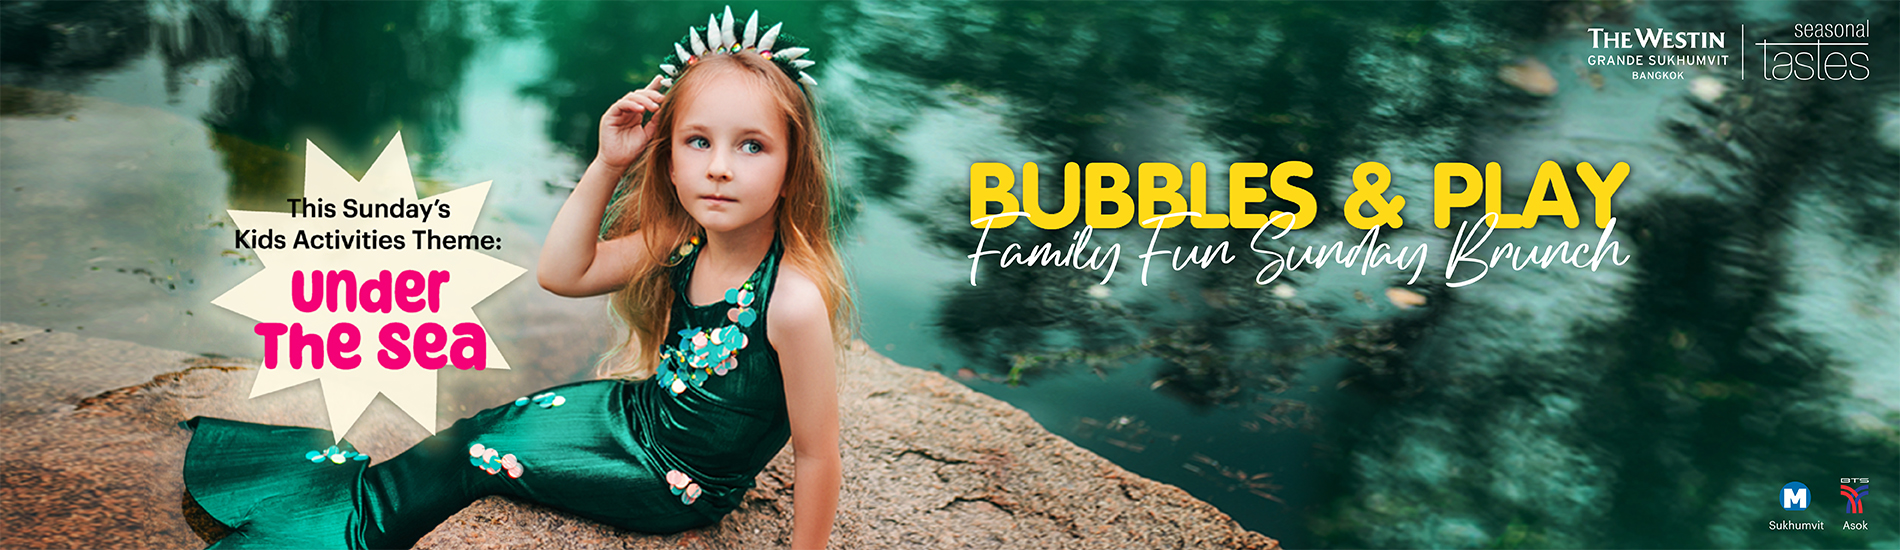 Bubbles & Play Family Fun Sunday Brunch: Under the Sea Theme 